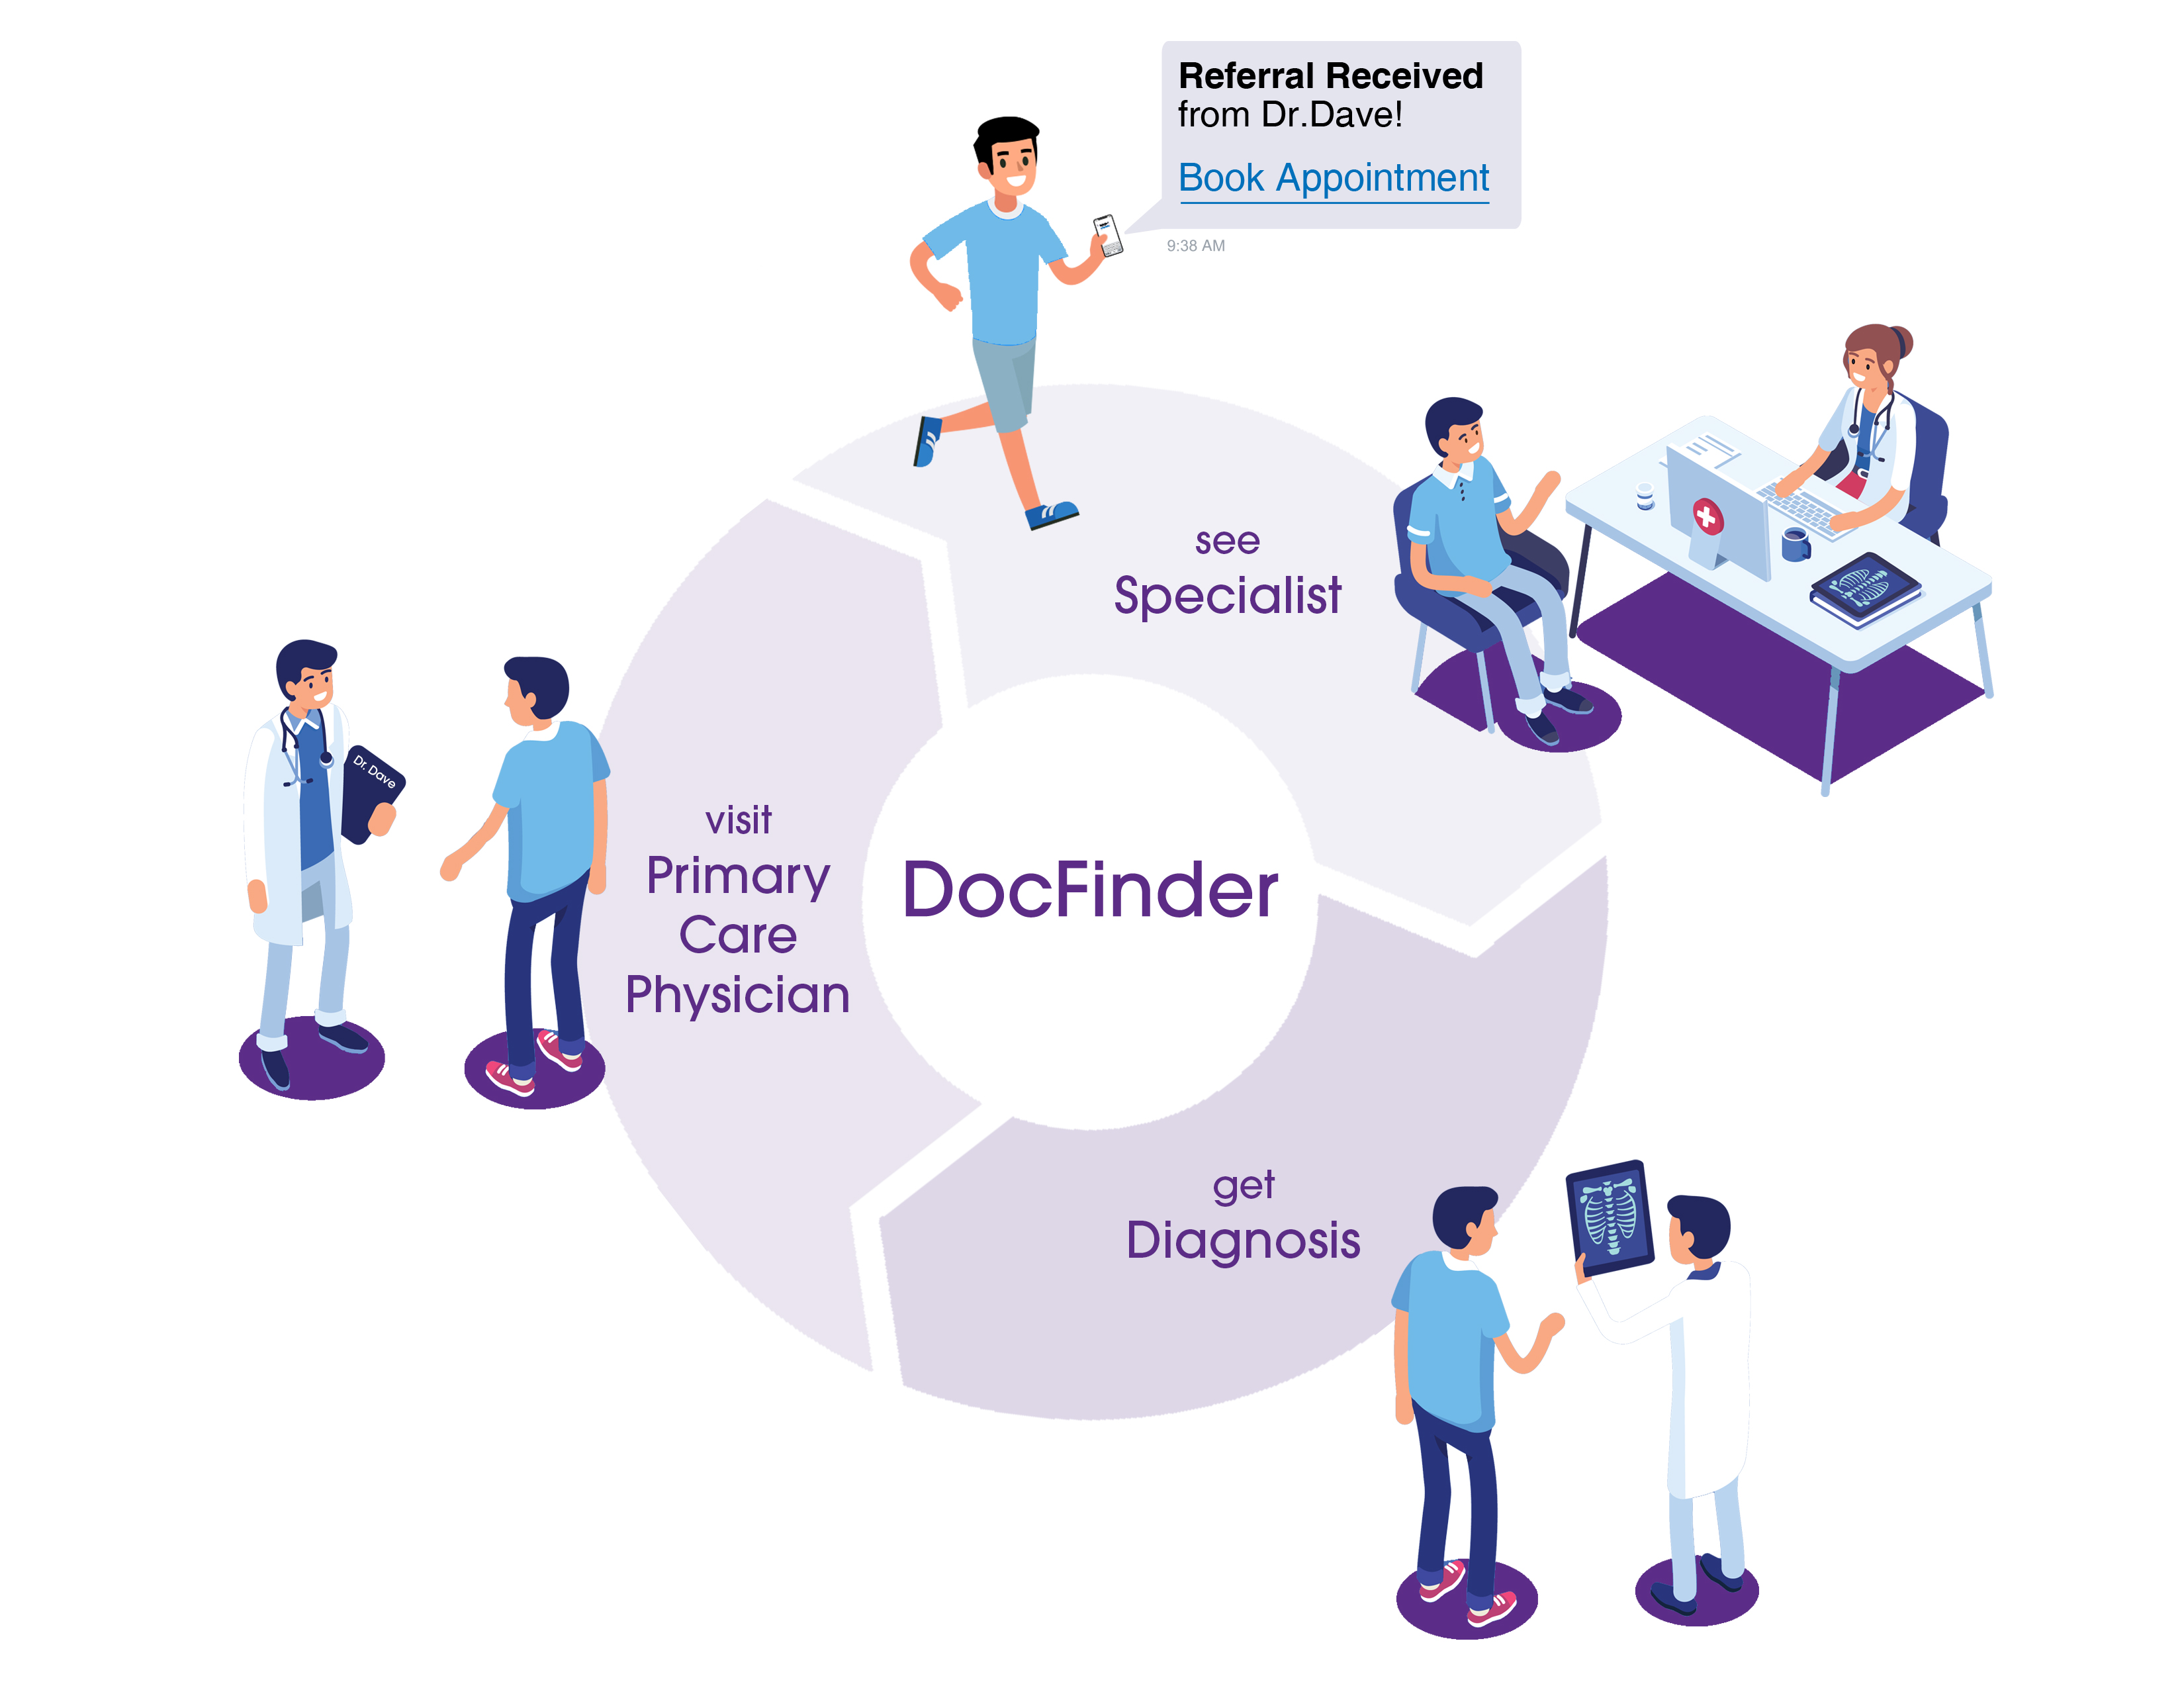 Hey Doctors, Here’s How To Get New Patient Appointments via Your LabFinder Doctor Dashboard!